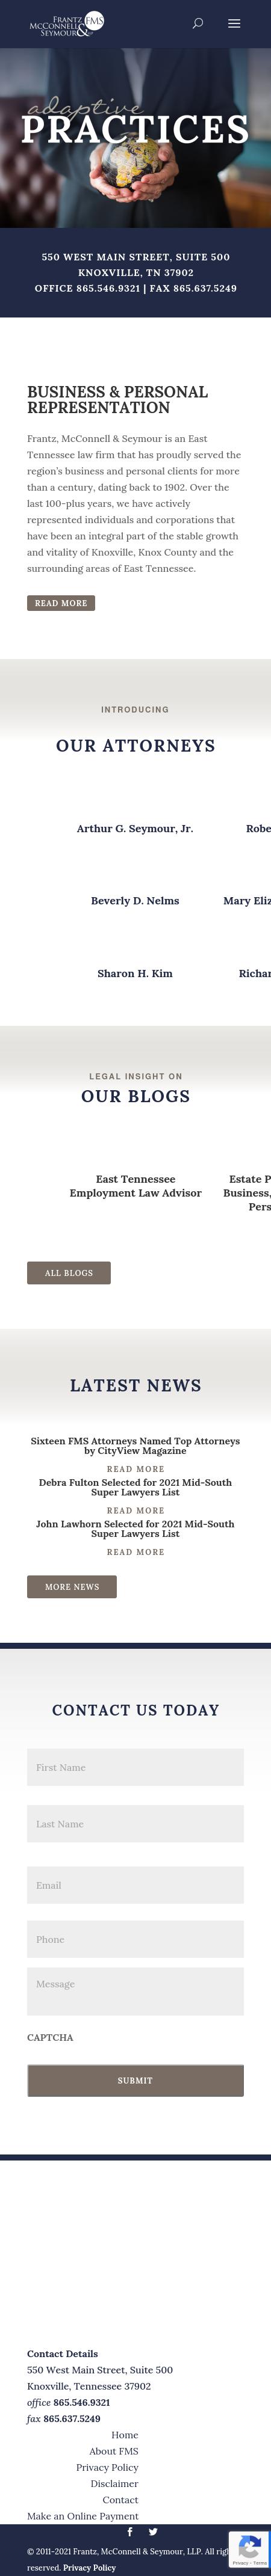 Frantz, McConnell & Seymour, LLP - Knoxville TN Lawyers